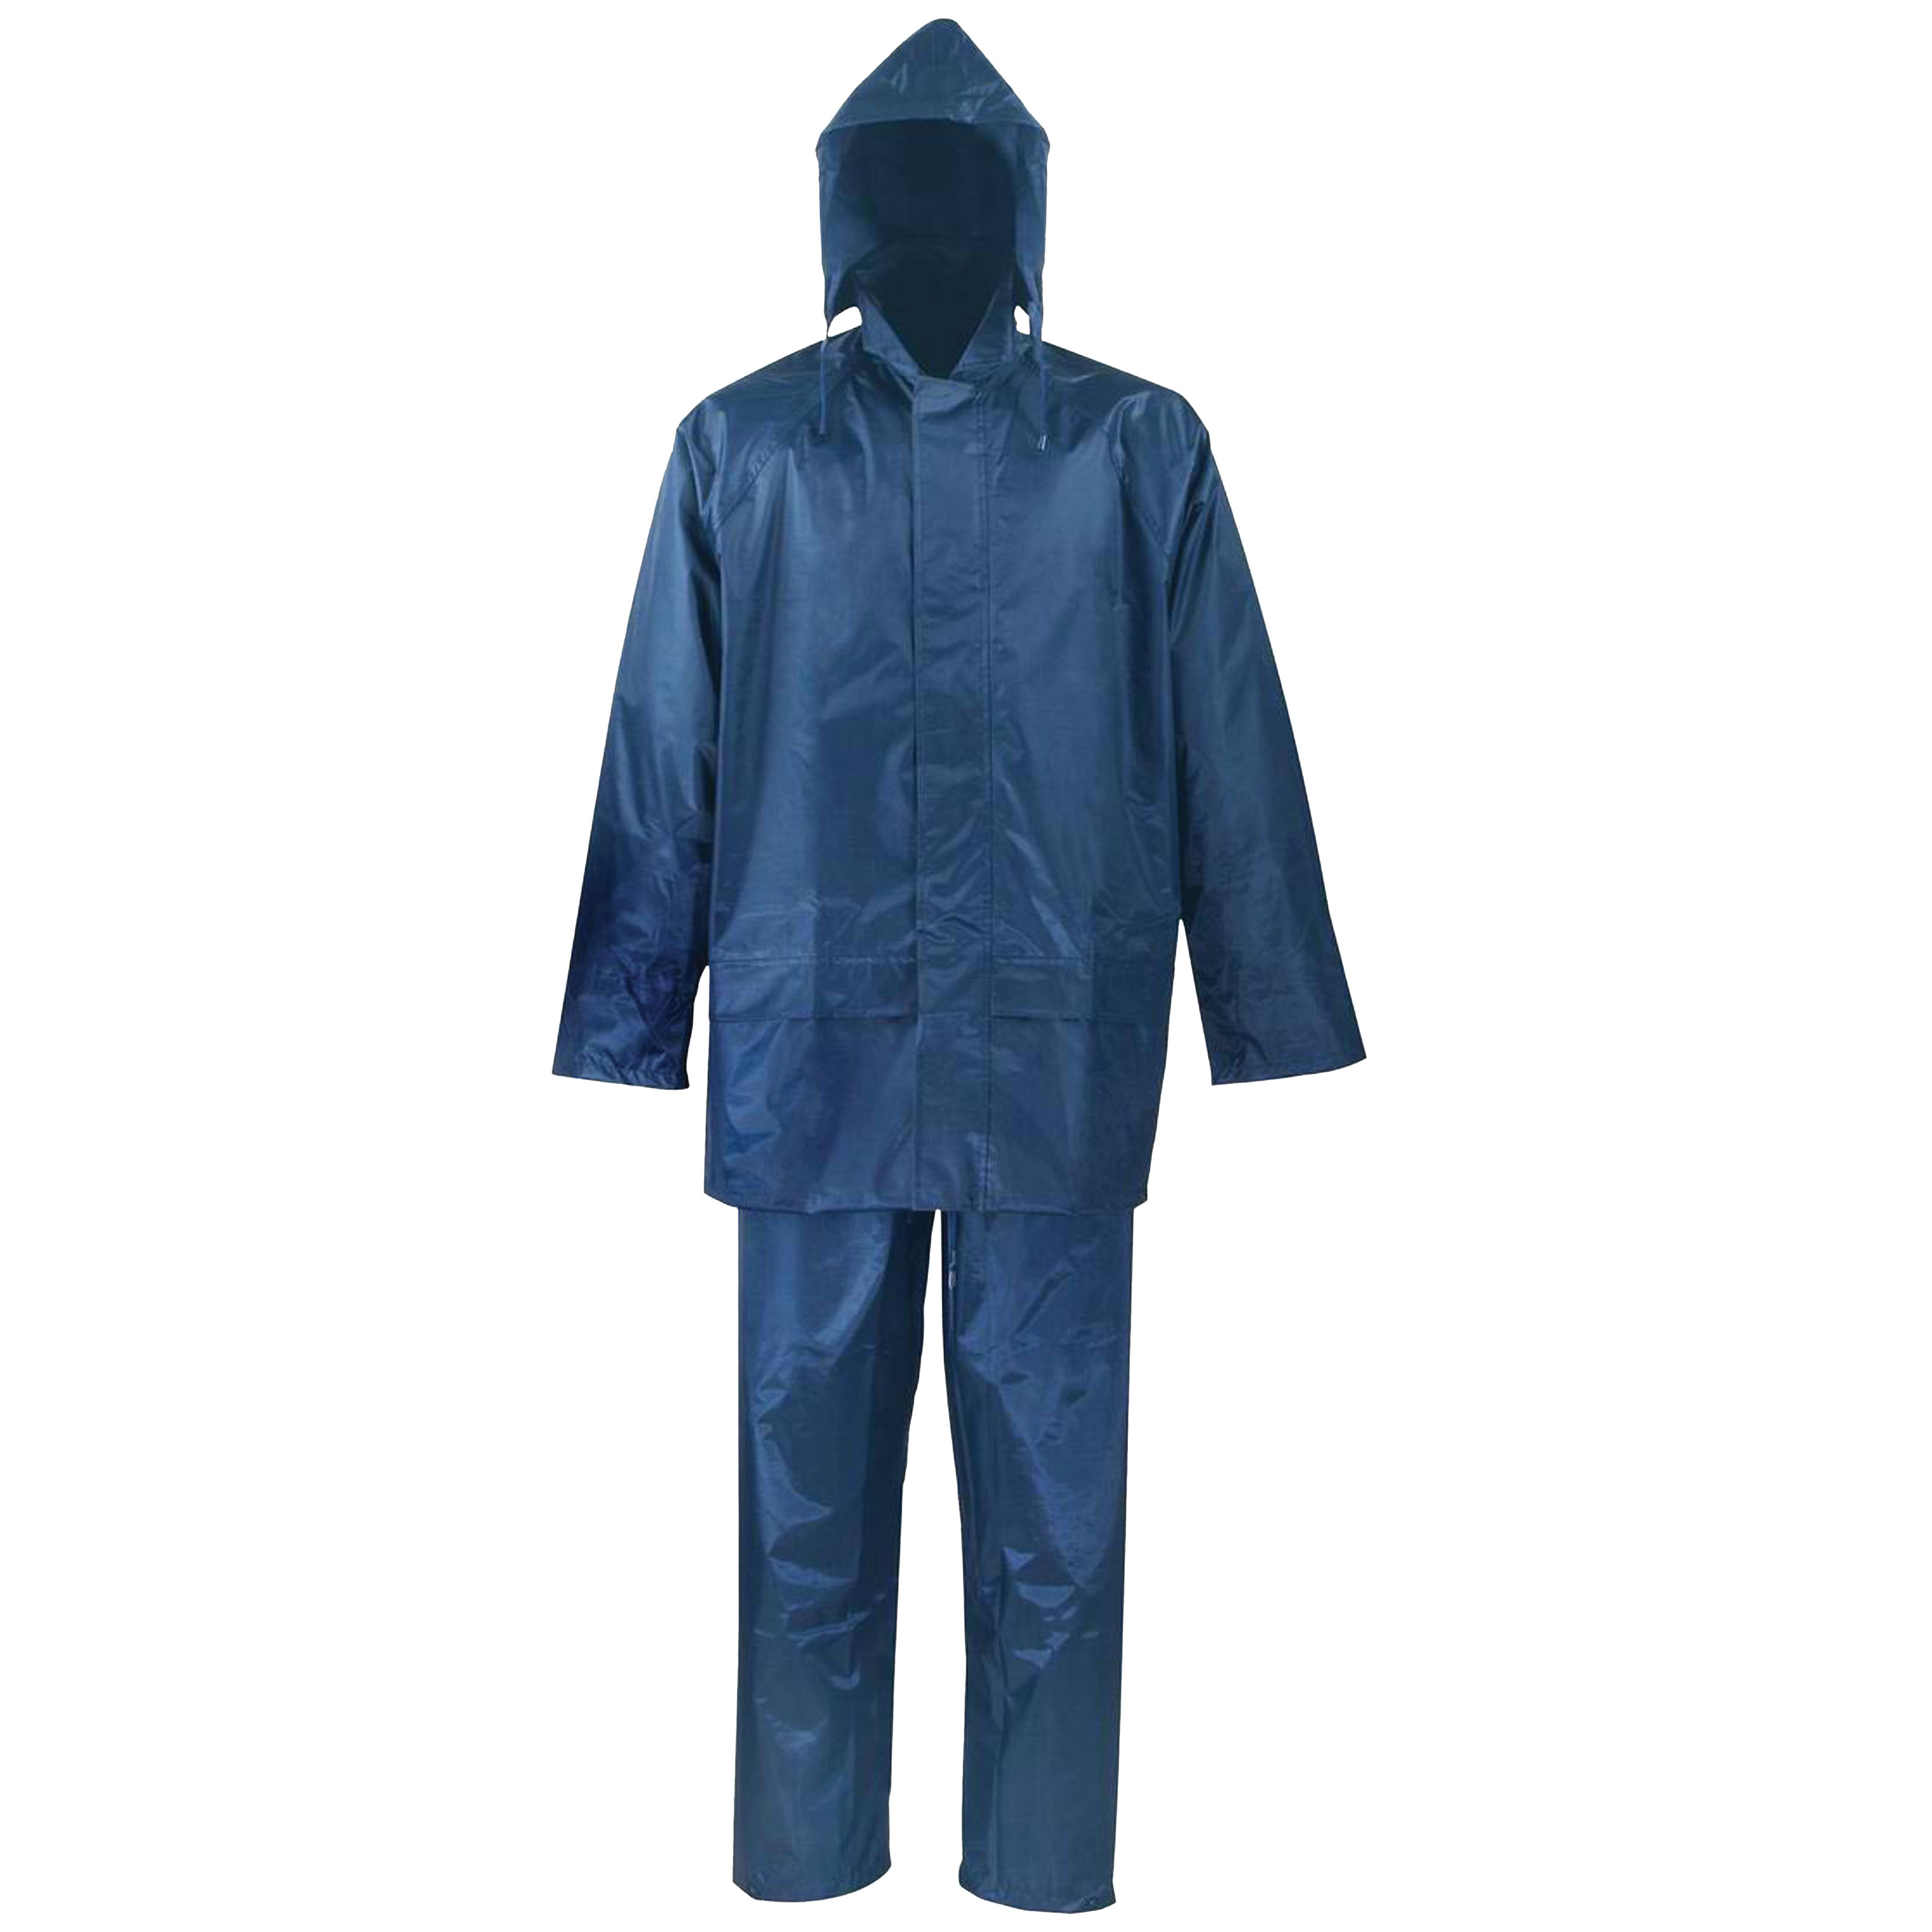 SPU045-L Rain Suit, L, 29-1/2 in Inseam, Polyester, Blue, Drawstring Pull-Out Hood Collar